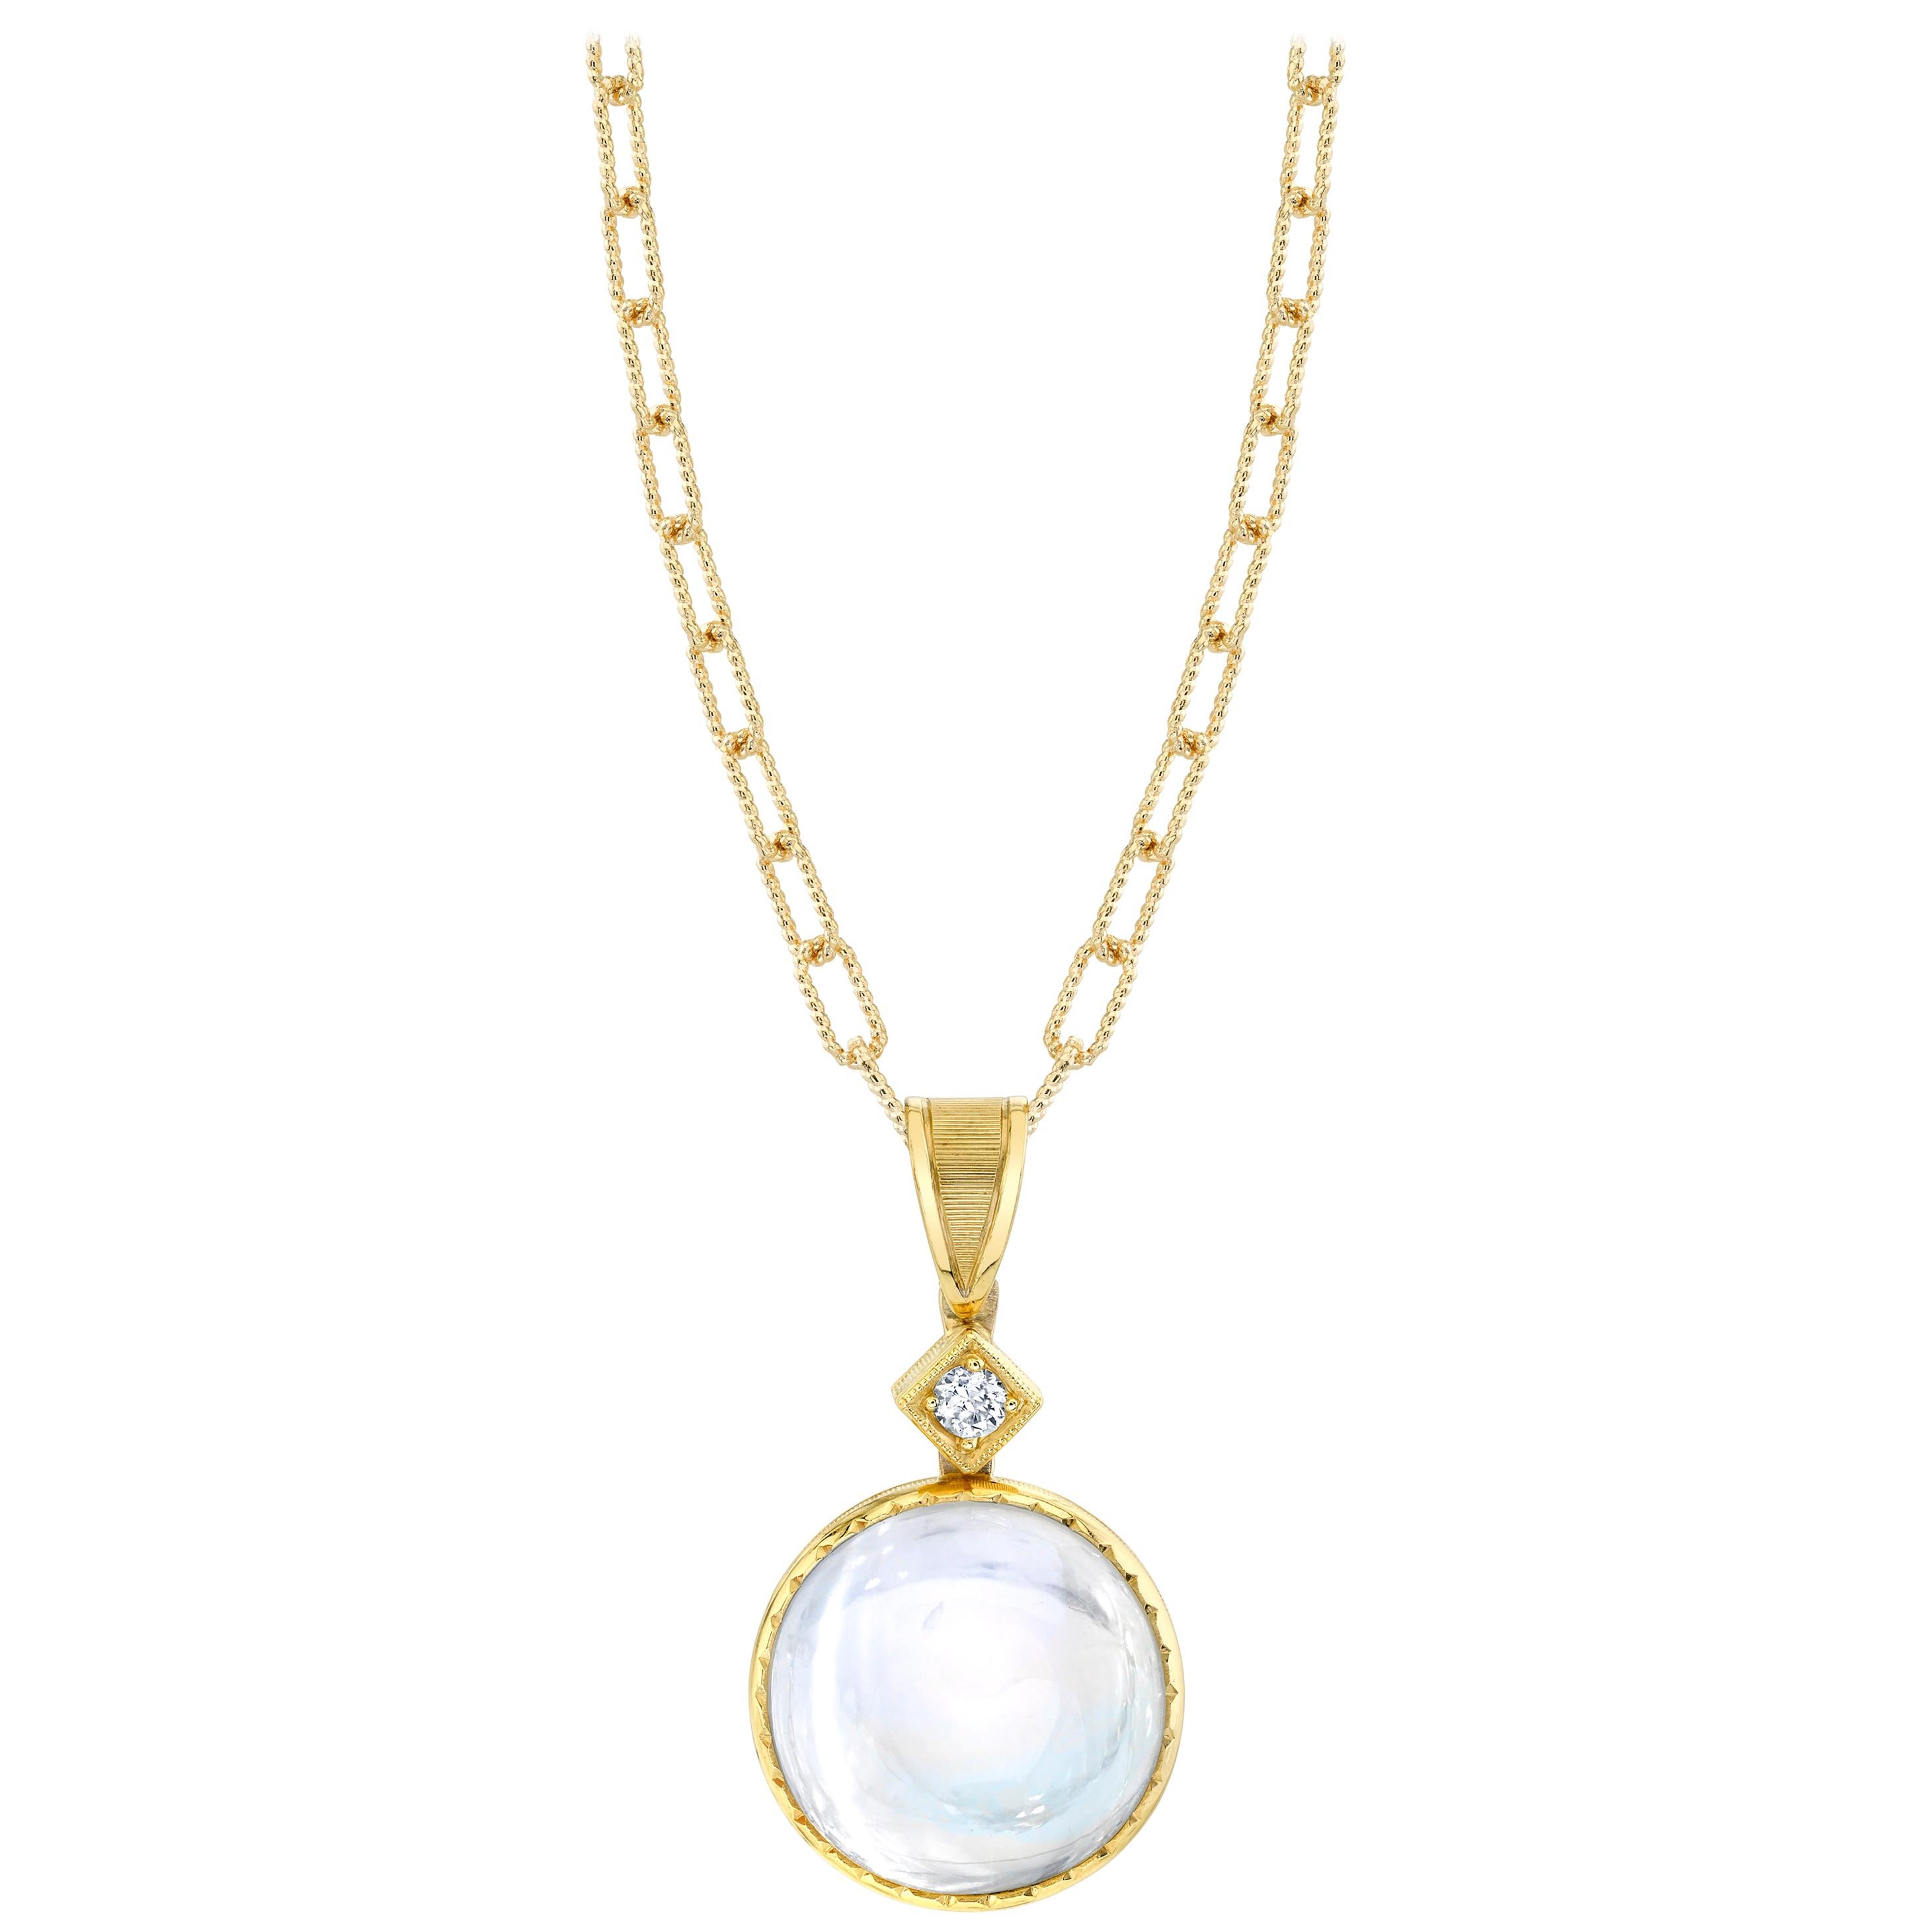 16.95 ct. Round Moonstone, Diamond, Yellow Gold Pendant Necklace with Chain